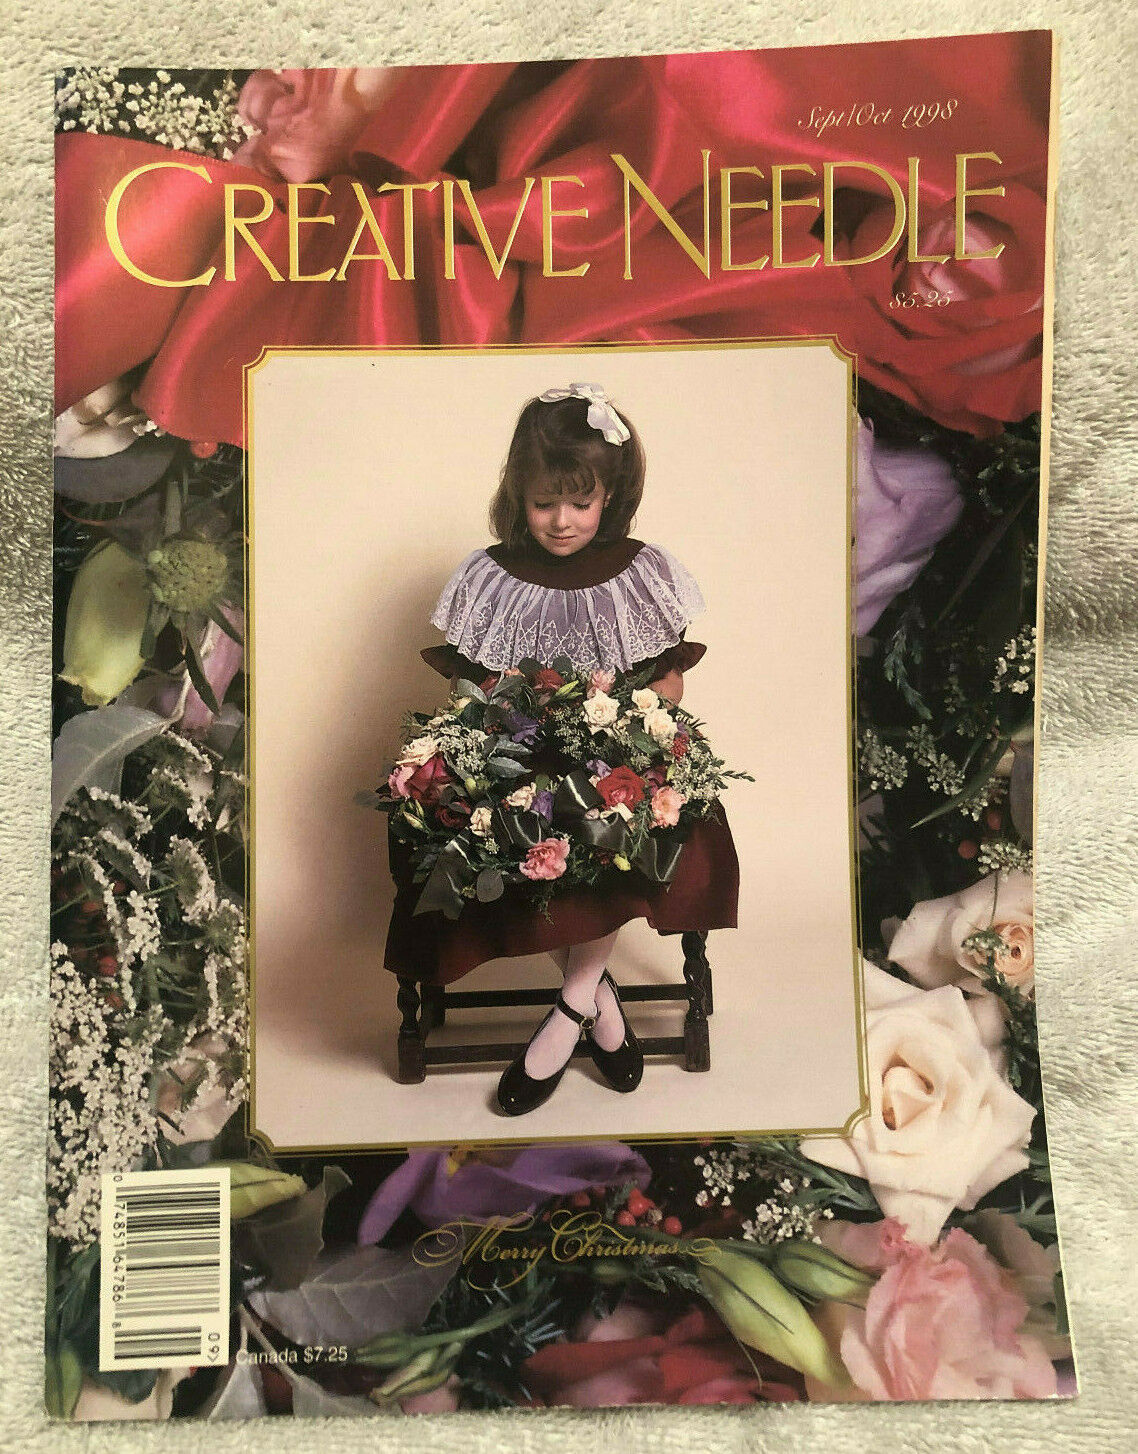 Creative Needle Magazine- September/October 1998 w/ Pattern Included as Pictured